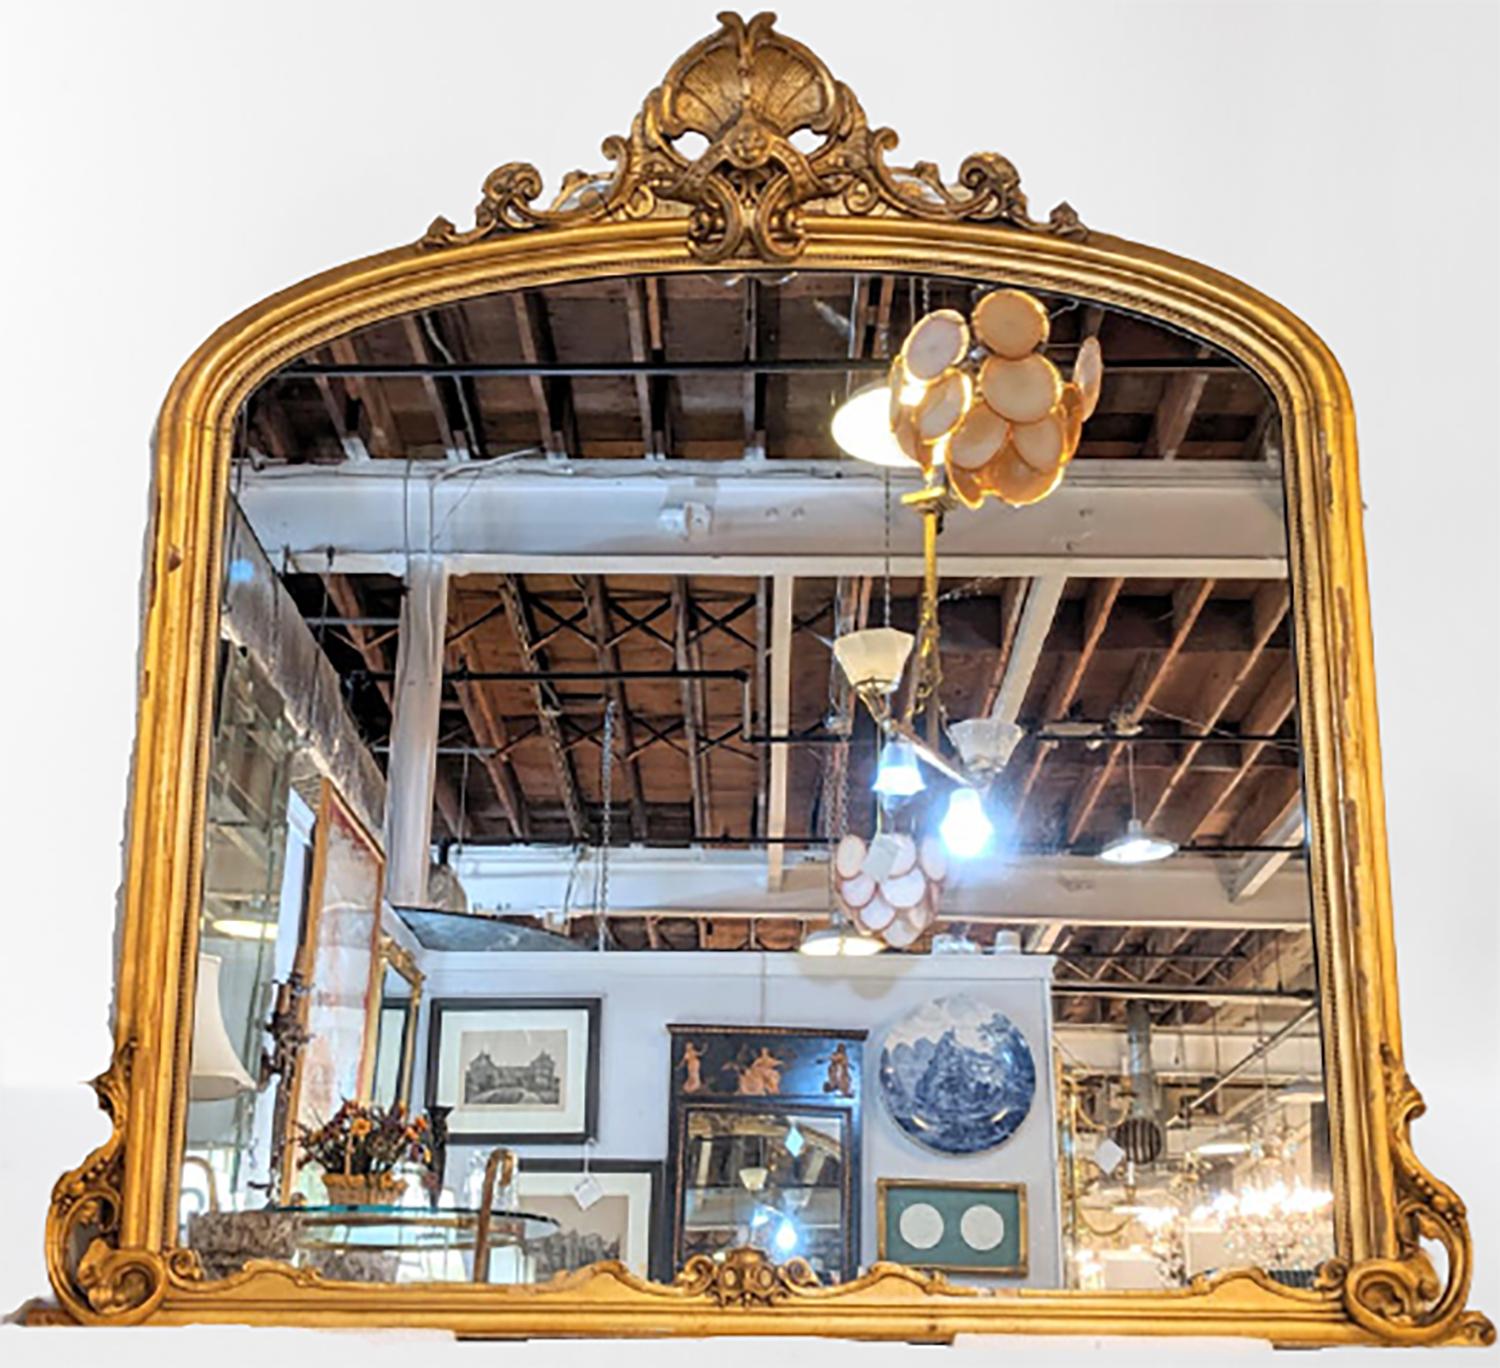 19th century giltwood mirror. Wall, console or over the mantel (fireplace) fireplace mirror. This palatial finely gilt wall or console mirror was found in a Greenwich Ct Mansion sitting atop a large fireplace. The finest quality gilt with a carved